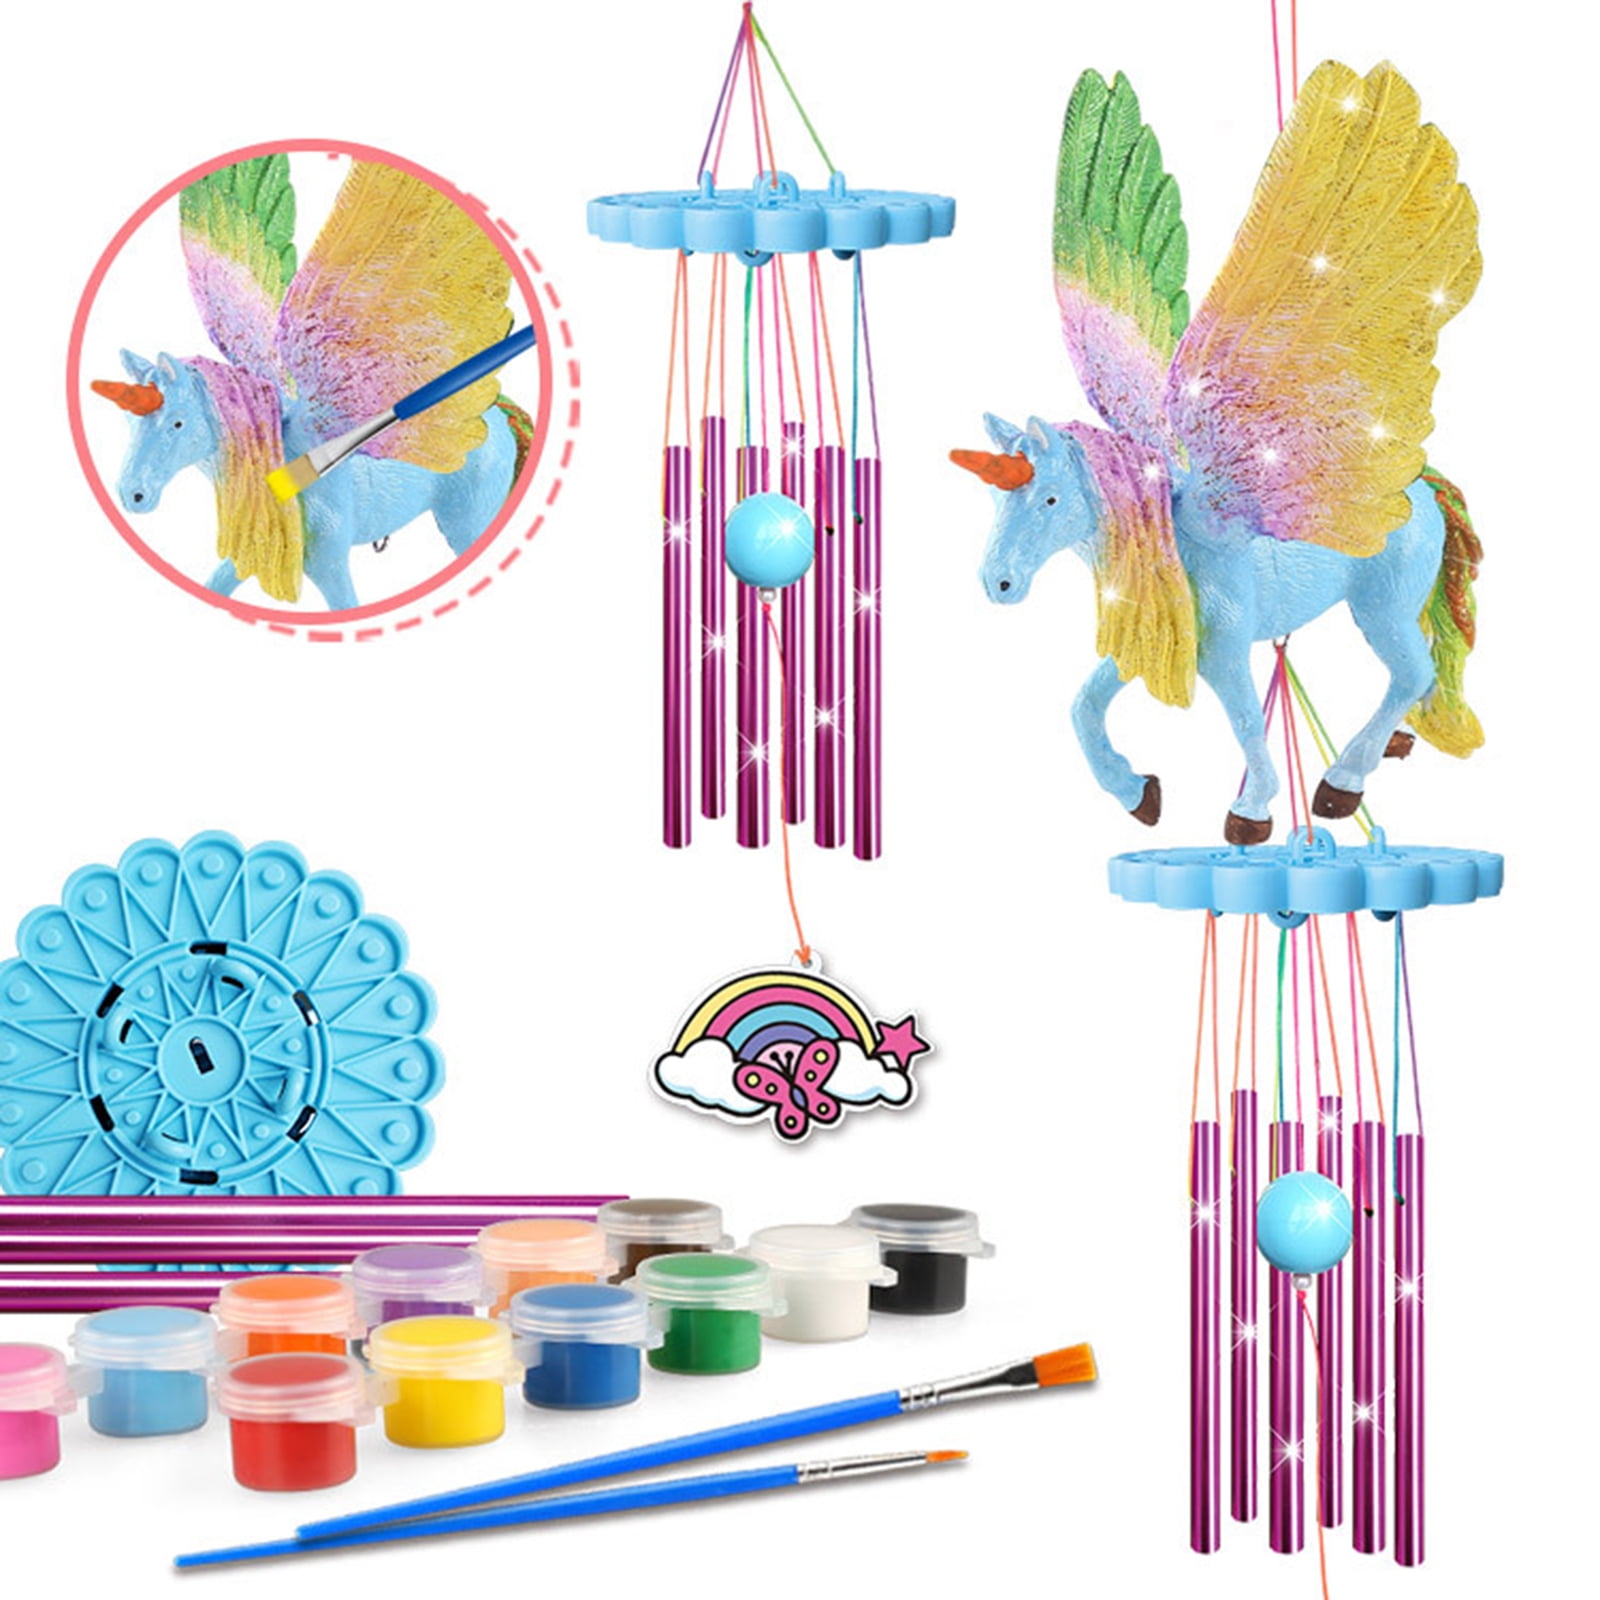  90shine 30PCS Assorted Painting Kit Arts and Crafts for Kids  Ages 8-12 - DIY Bird Houses,Wind Chimes,River Rocks,Unicorn Cake Toys -  Girls Boys Fall Christmas Gifts Party Favors : Toys 